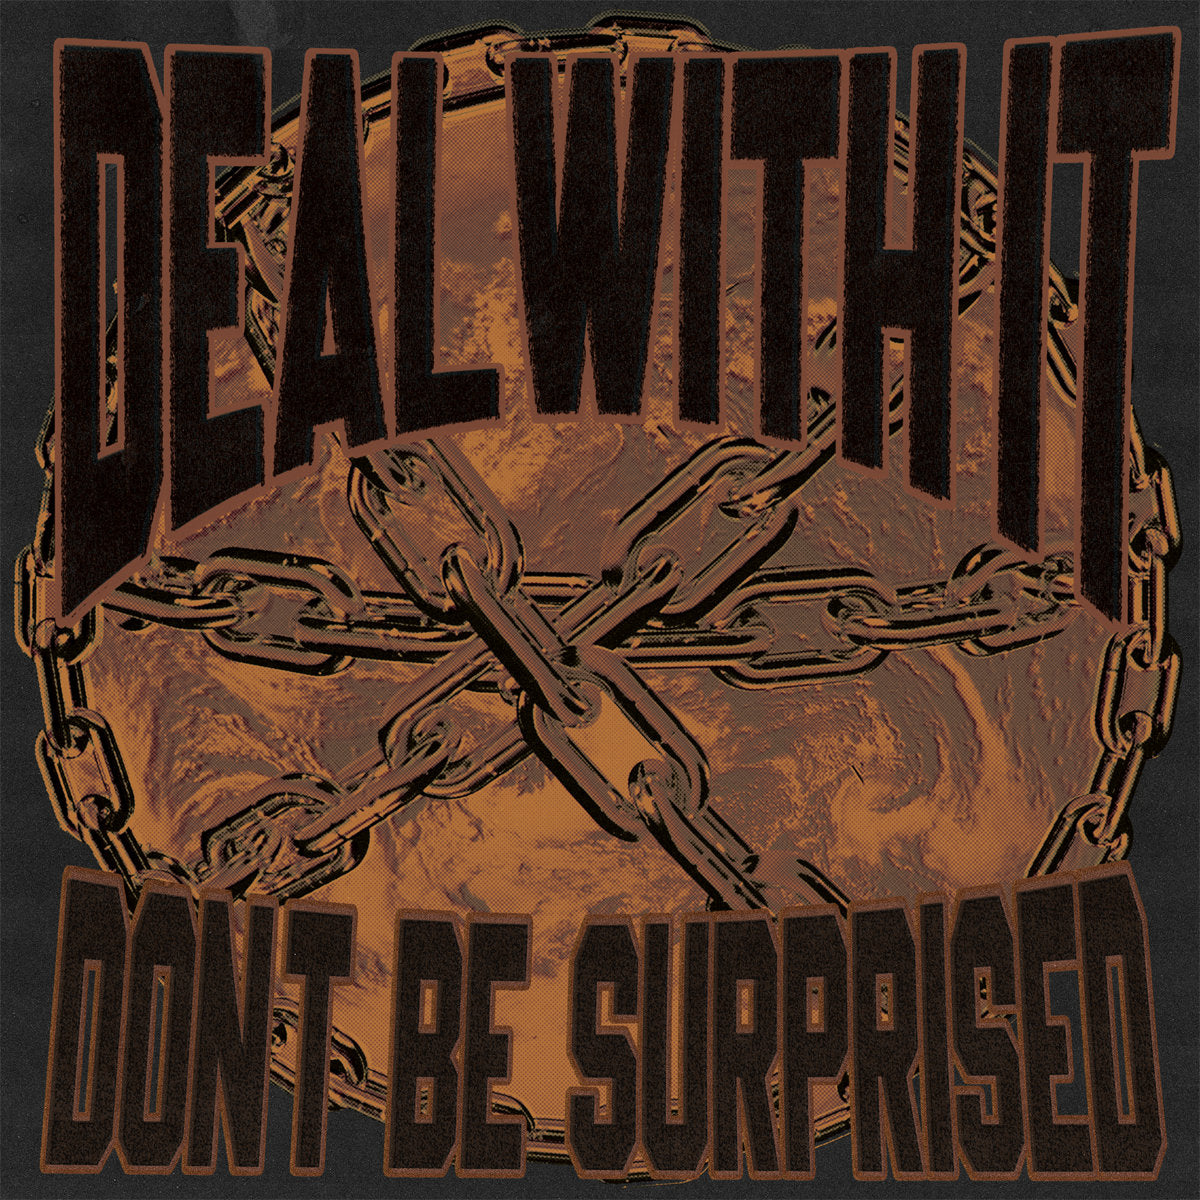 Deal With It - 'Don't Be Surprised'